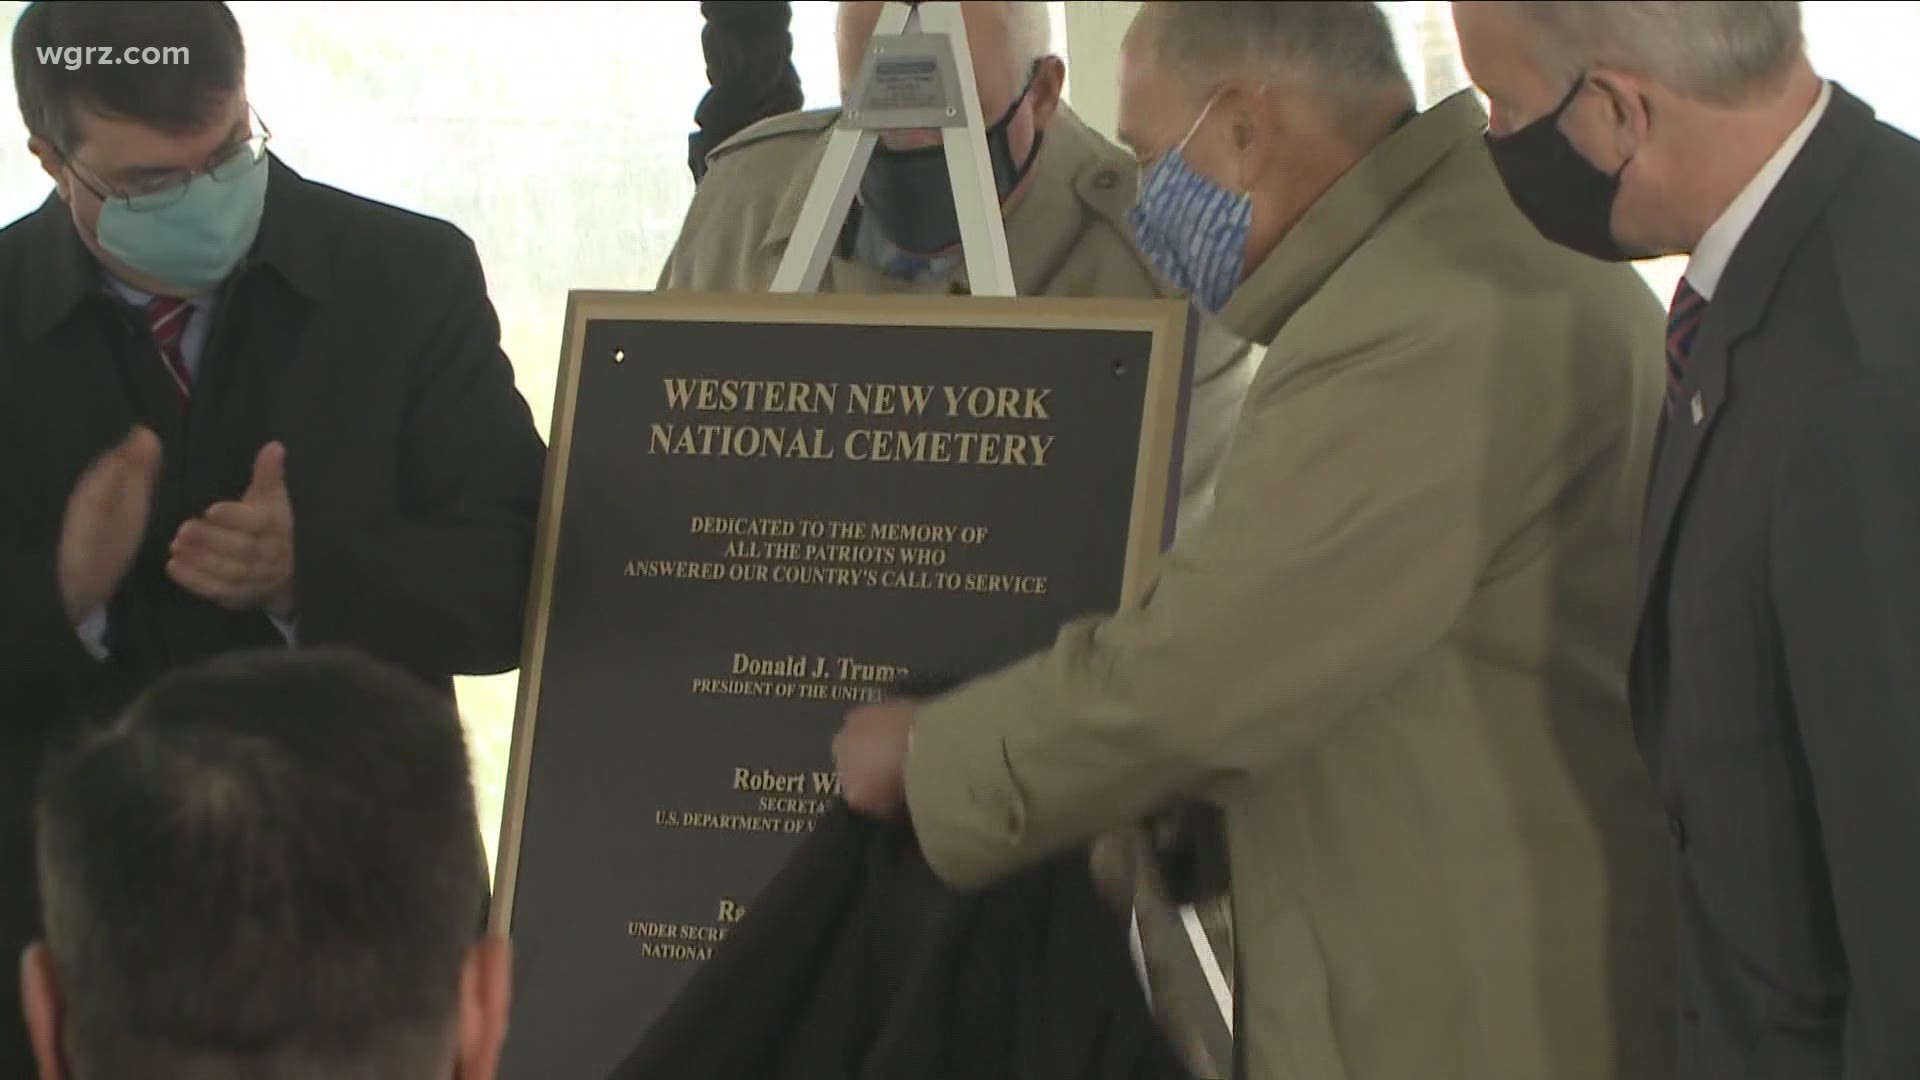 Lawmakers and veterans have been working for years to get Western New York its own veterans cemetery. And today, a long-awaited dedication ceremony was held in Corfu